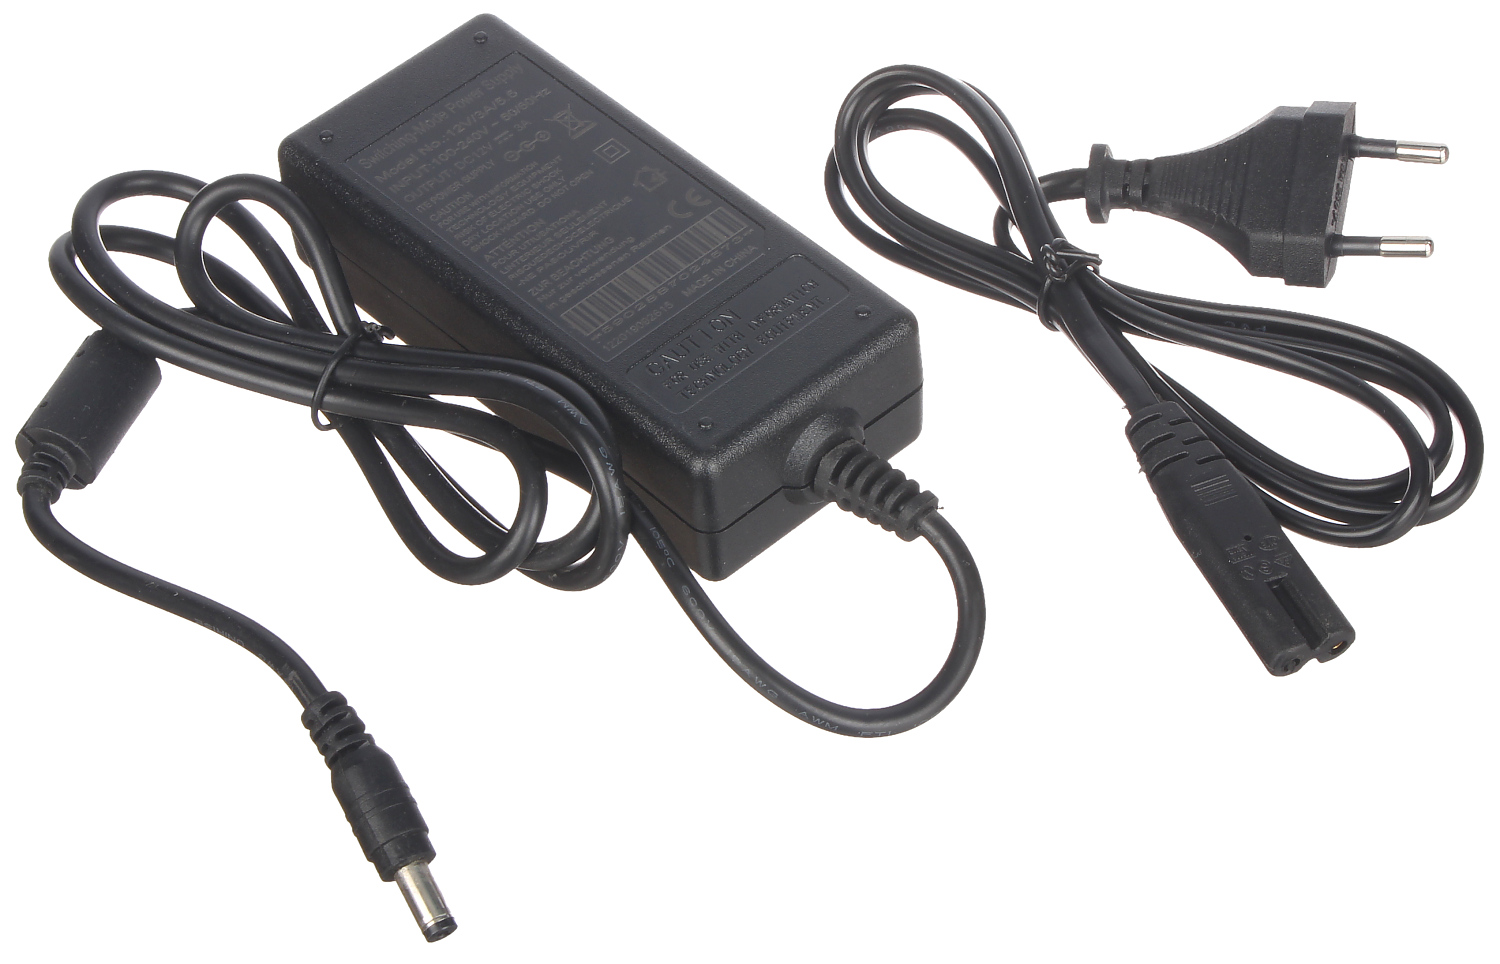 CHARGEUR 12V 3A